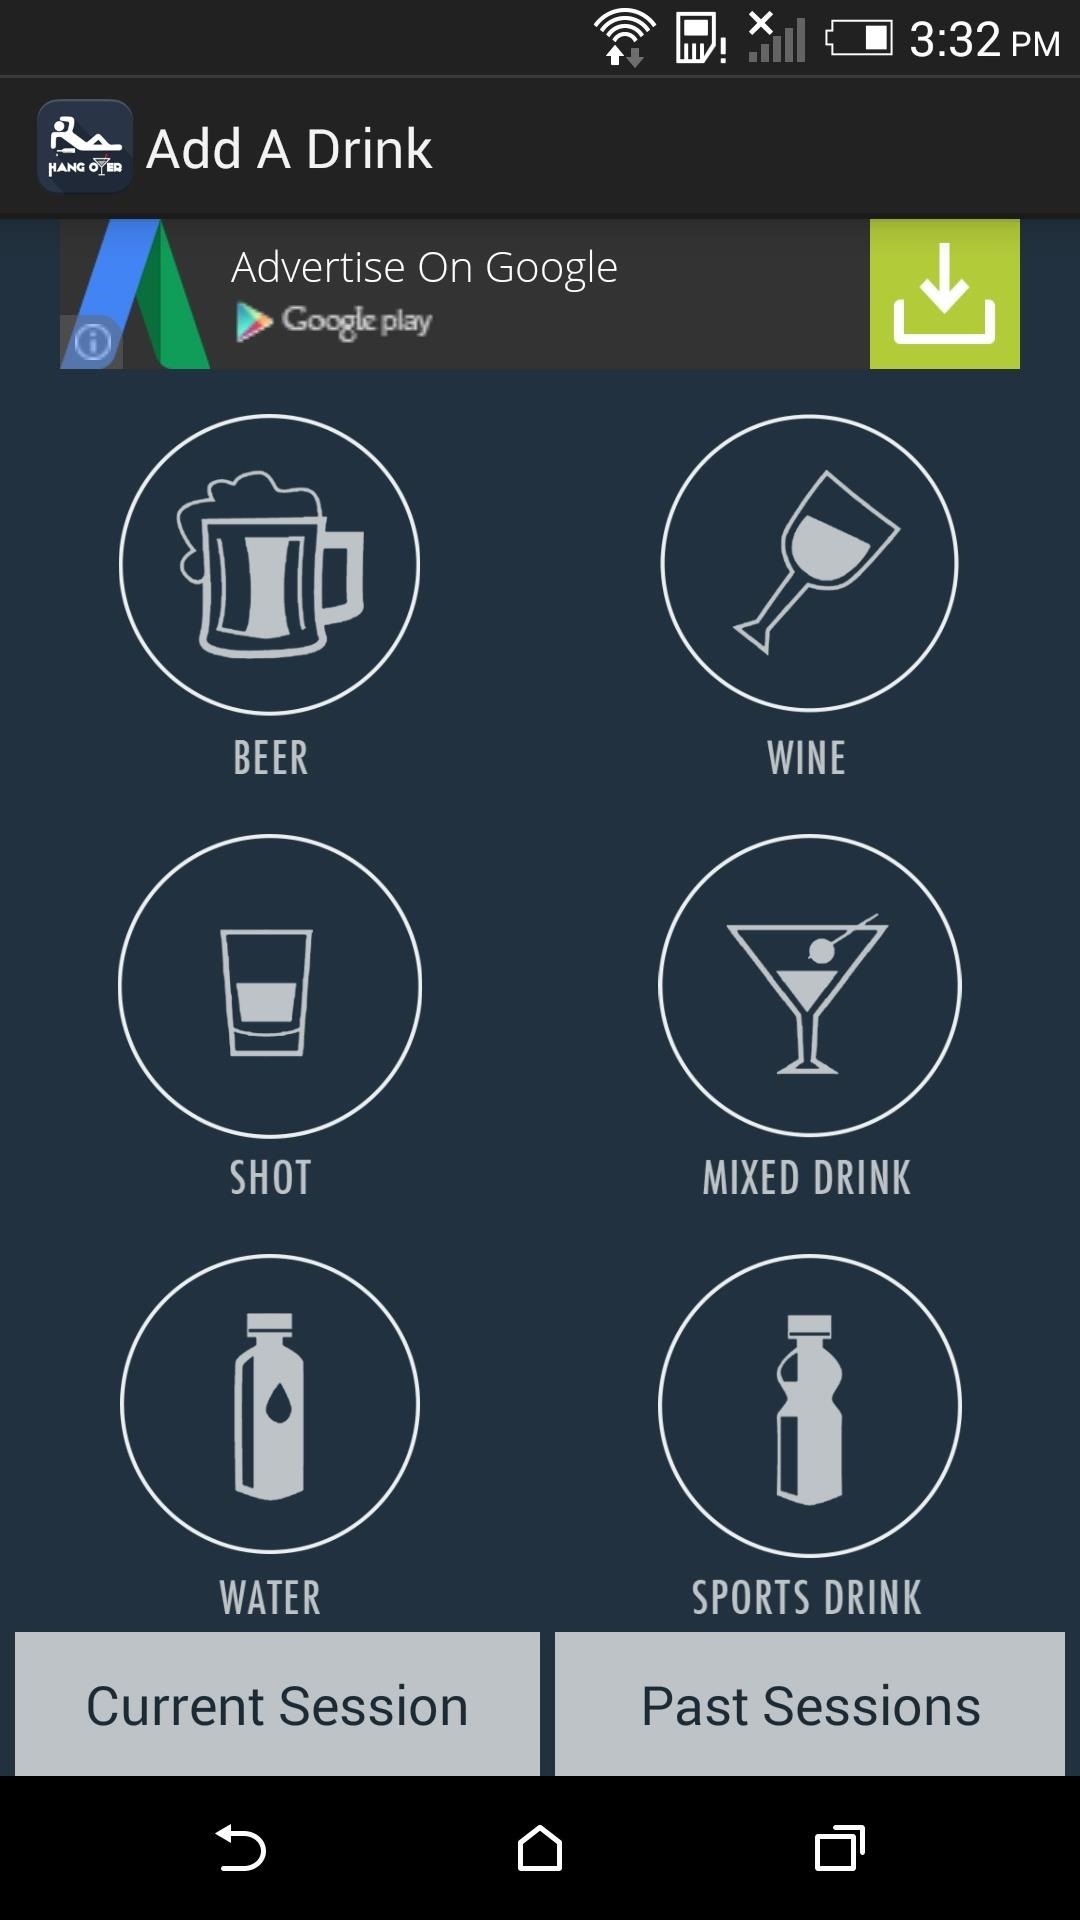 Hangover Prevention: Use Your Android Phone to Find Headache-Free Drinking Patterns